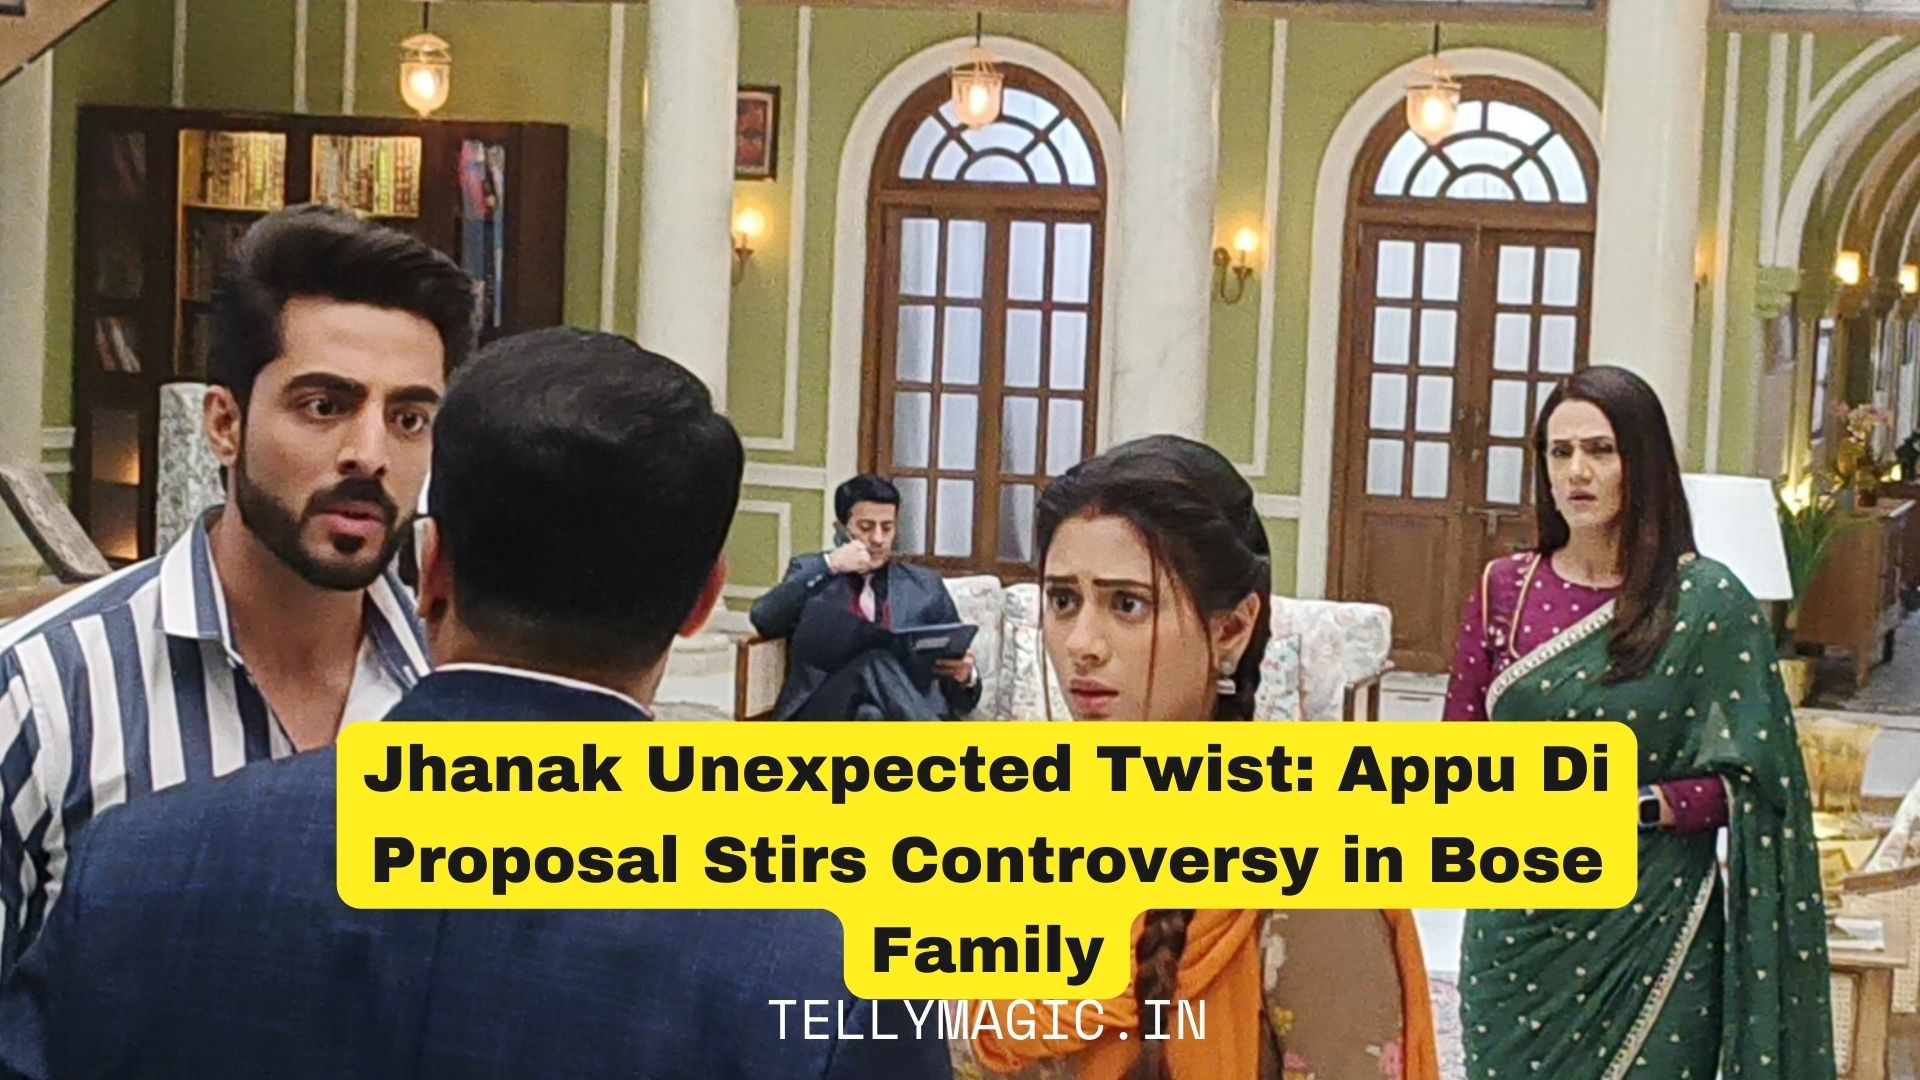 Jhanak Unexpected Twist: Appu Di Proposal Stirs Controversy in Bose Family